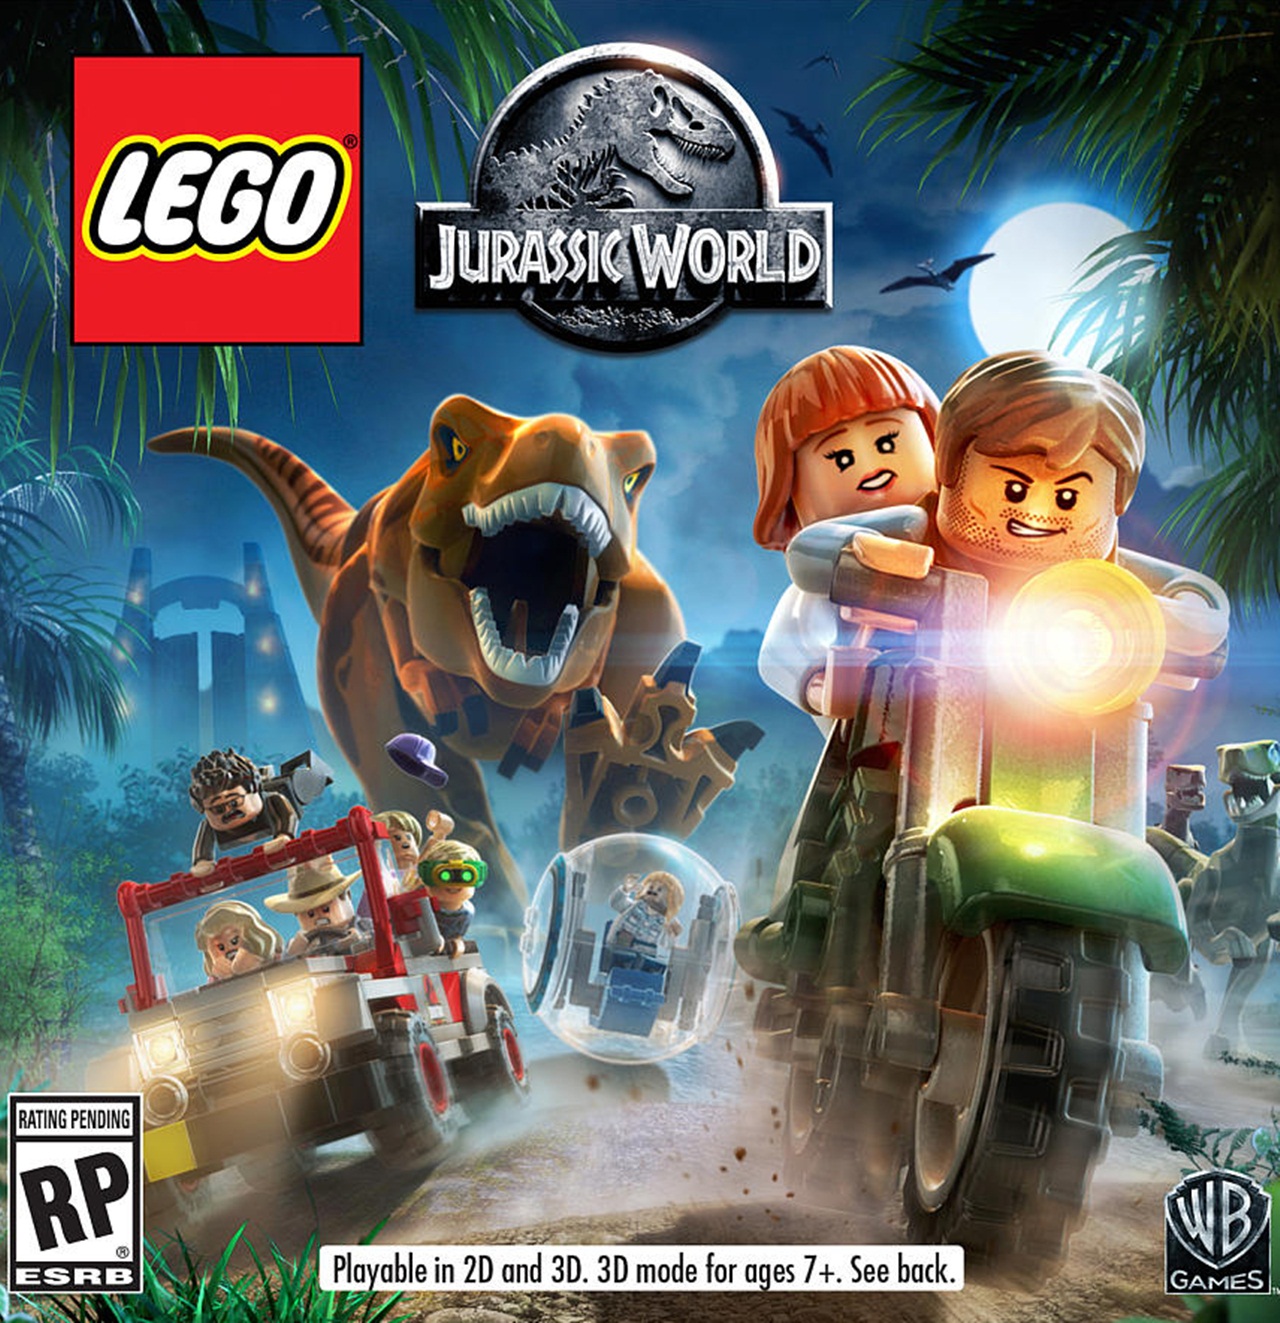 Lego Jurassic World Game Trailer And Wallpapers - XciteFun.net